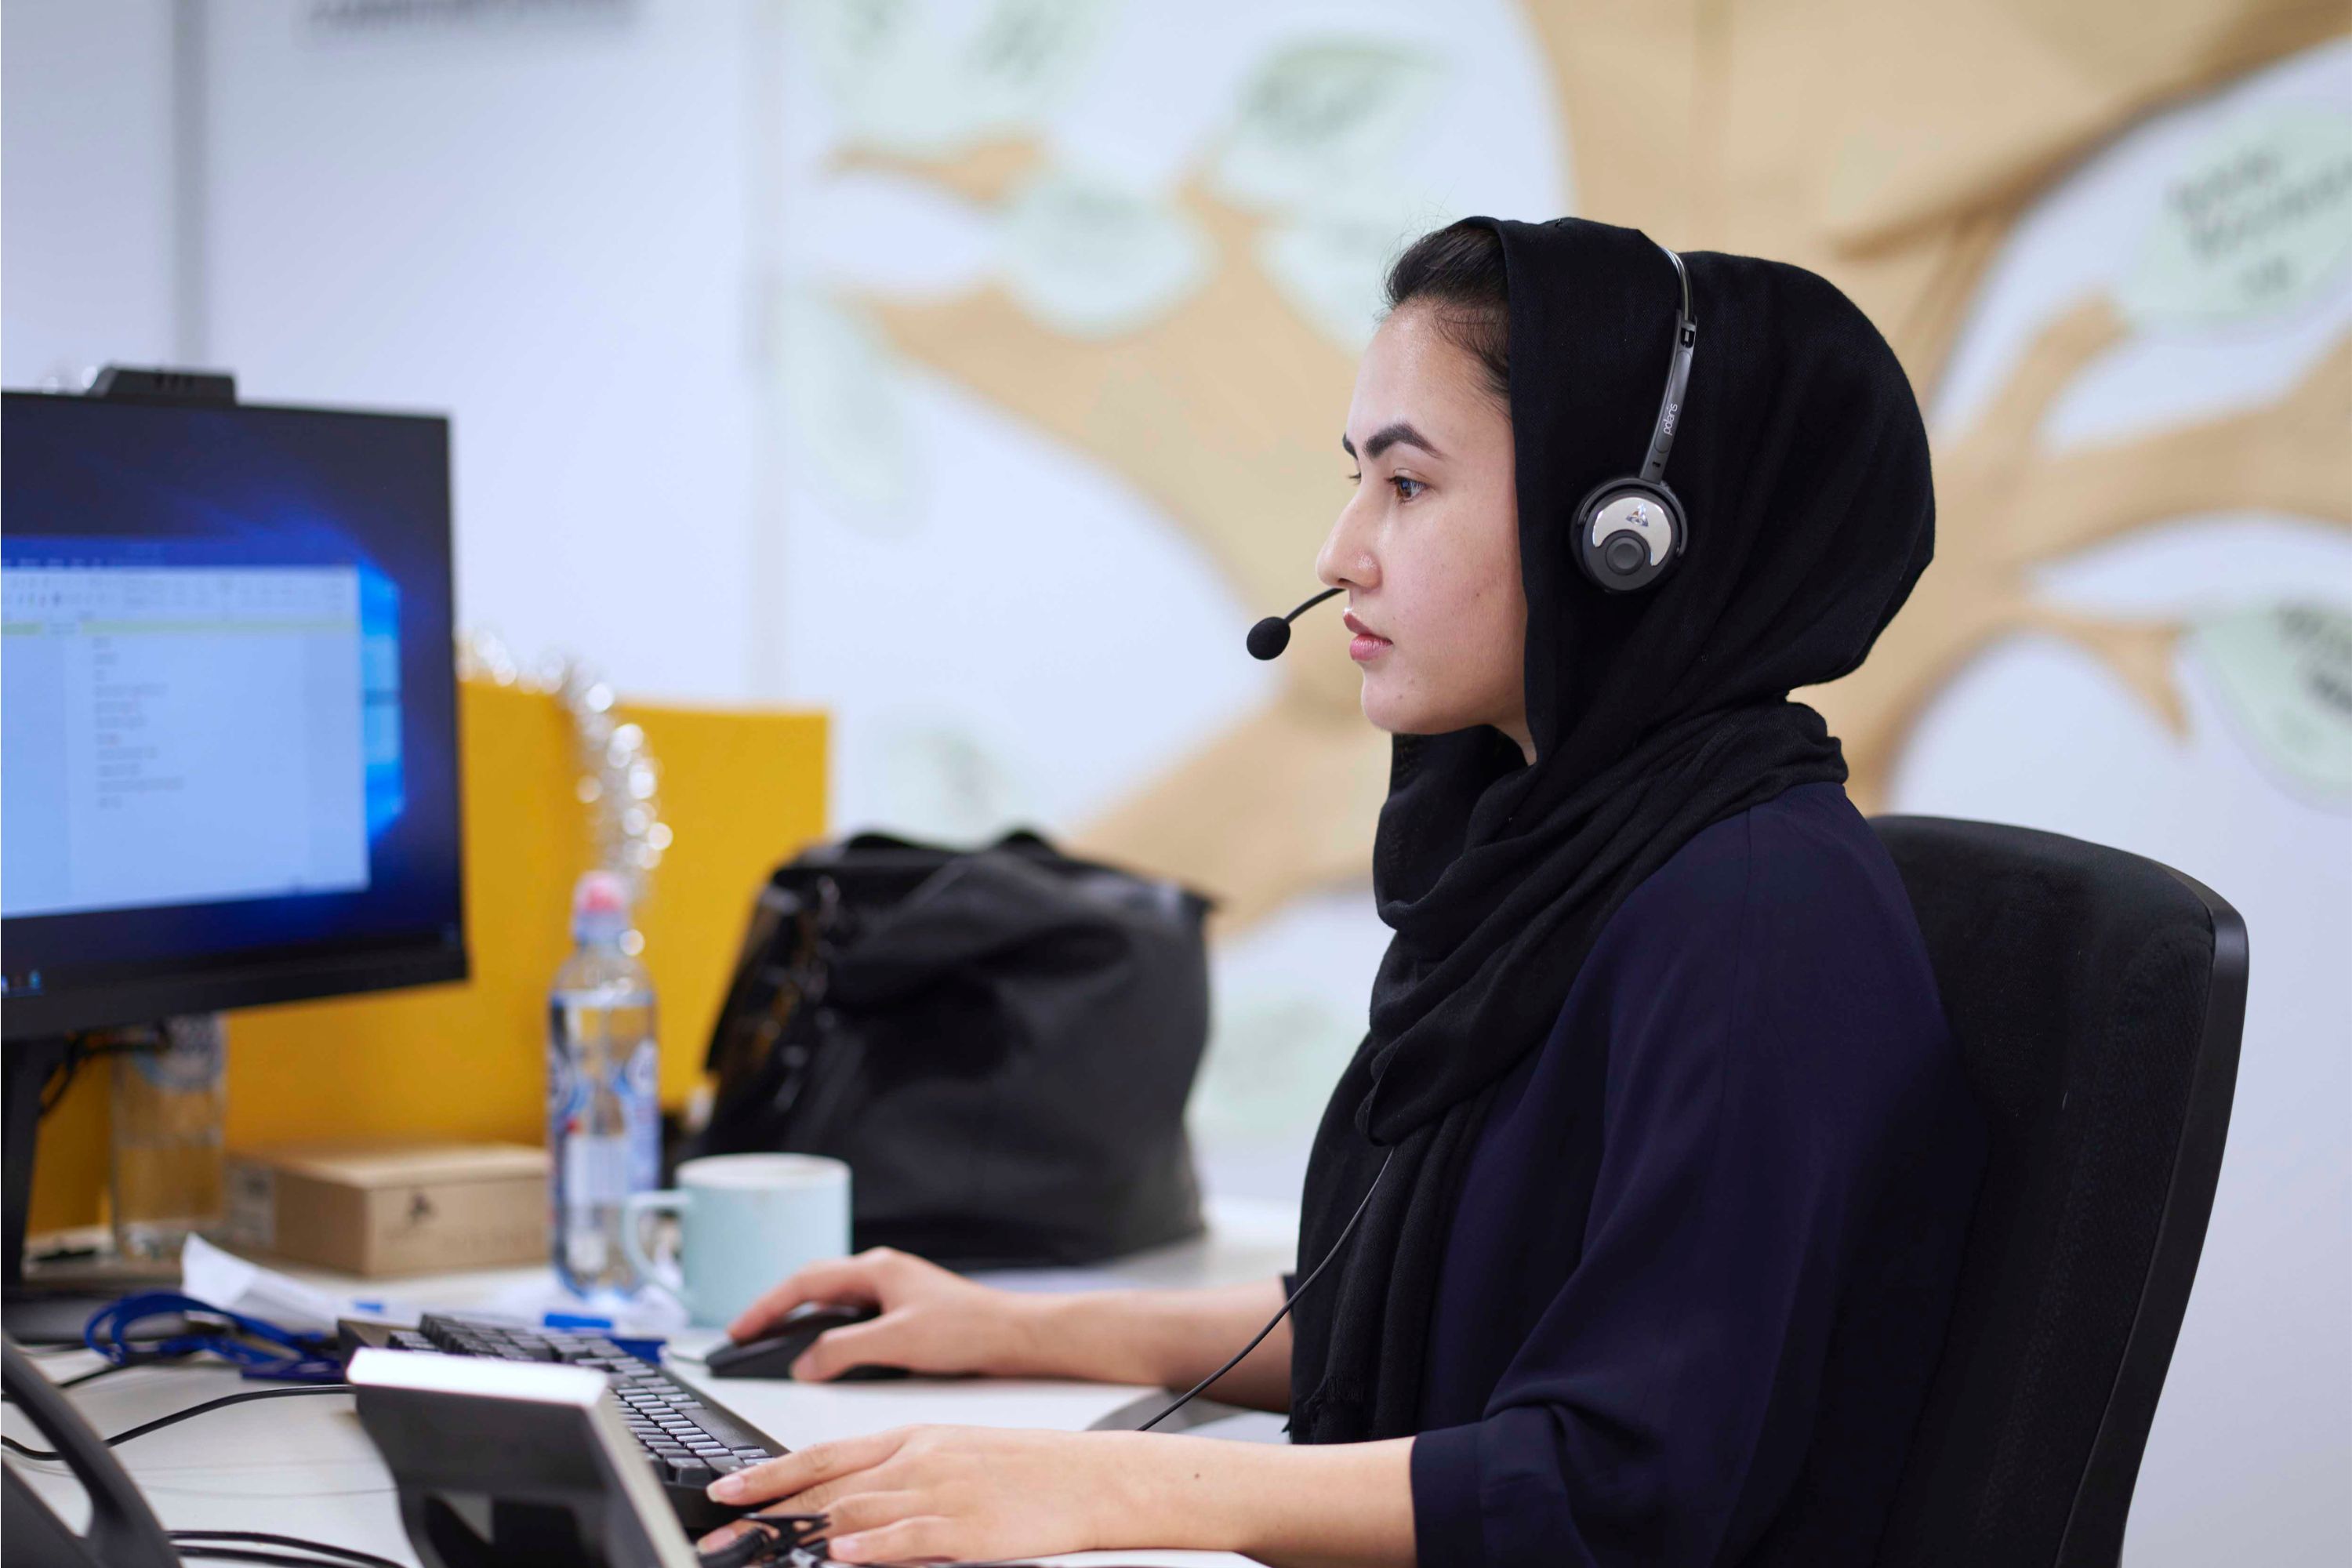 Service desk worker with headset 